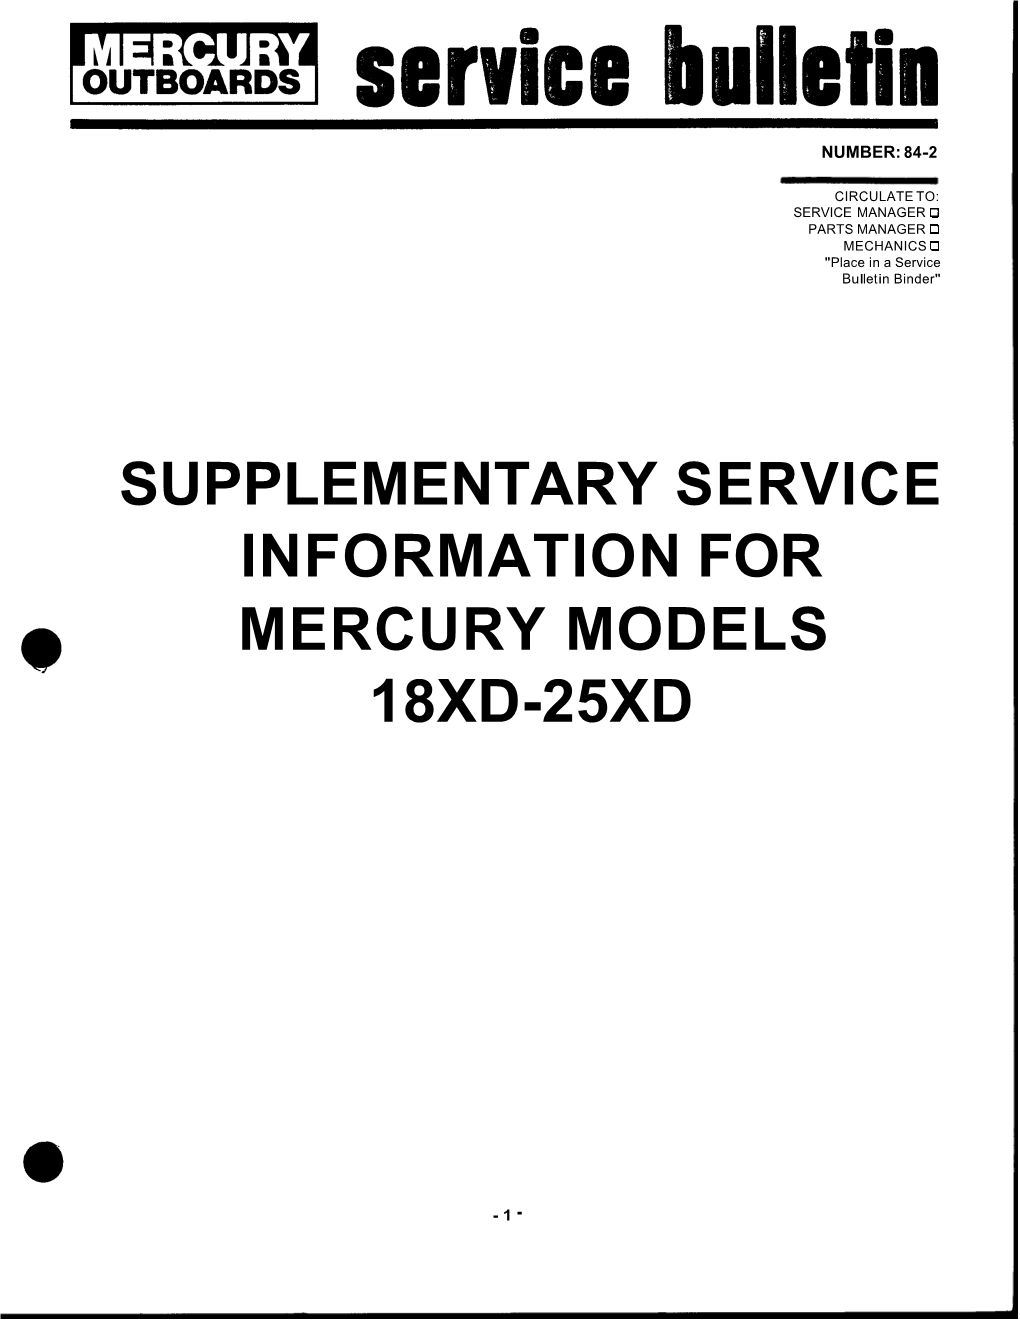 Supplementary Service Information for Mercury Models 18Xd-25Xd